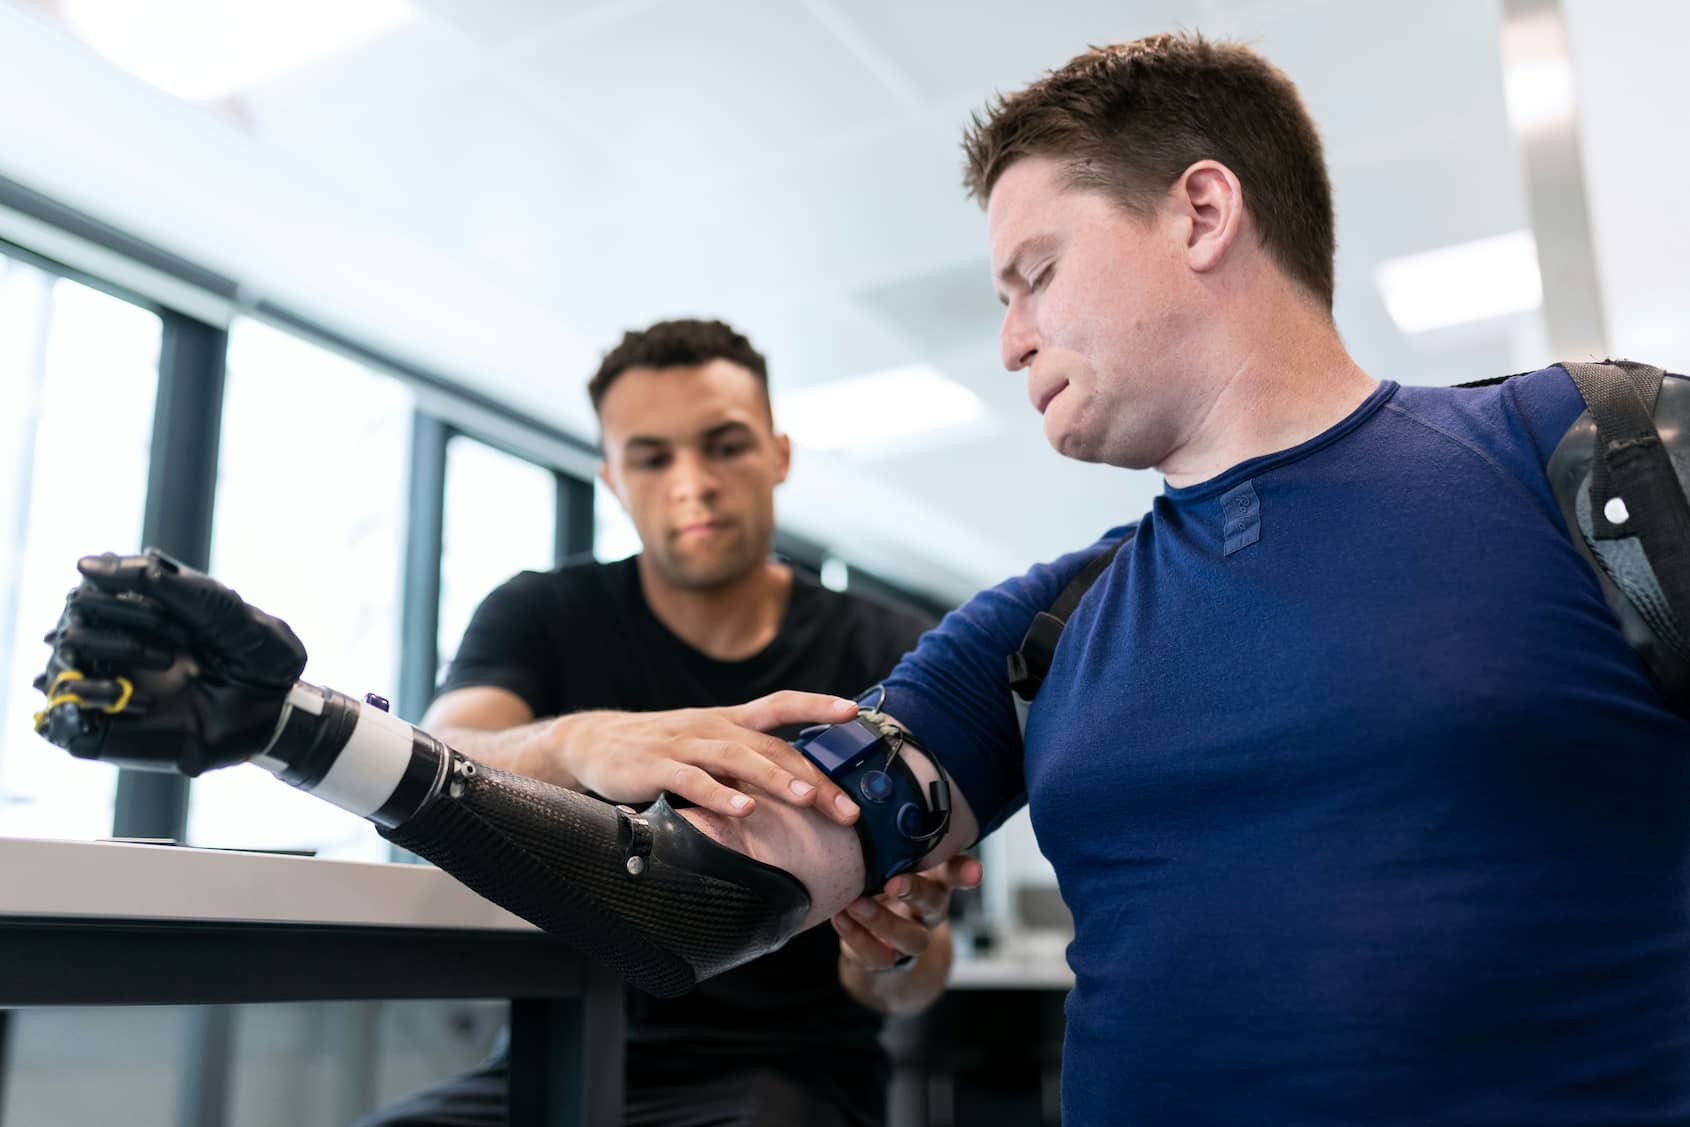 Patient being fitted with prosthetic arm